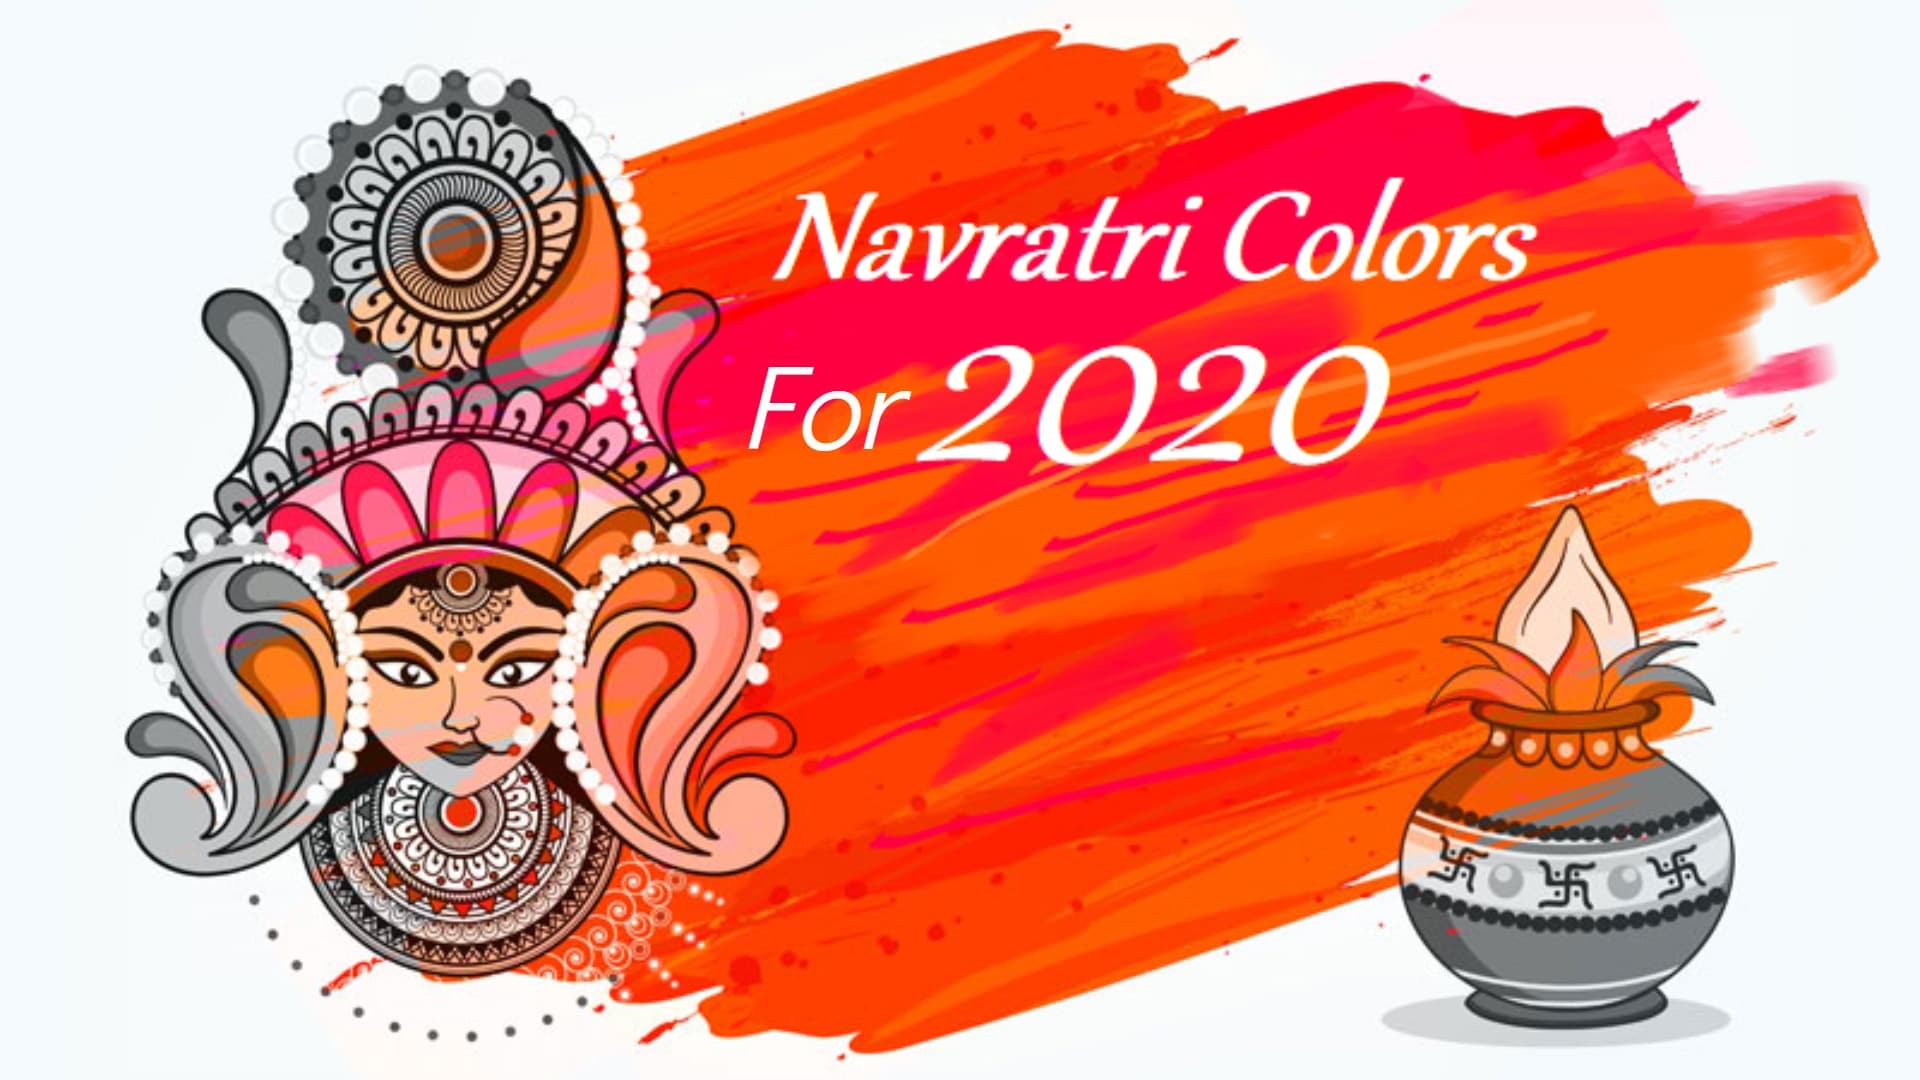 9 Navratri Colors List With Their Significance For 2020 9 navratri colors list with their